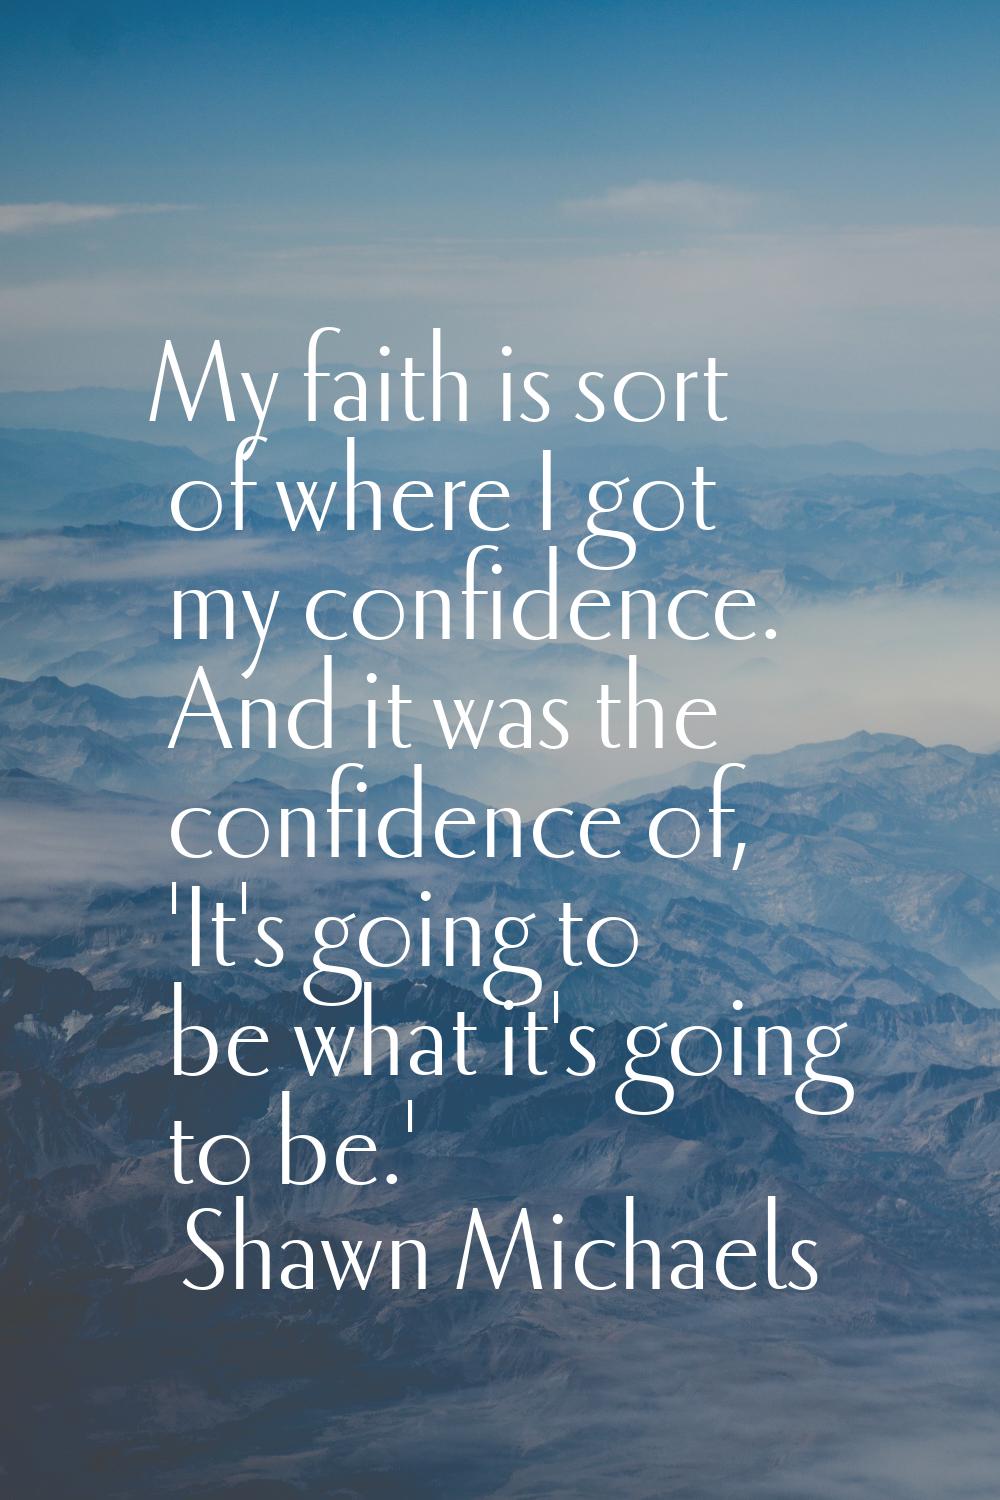 My faith is sort of where I got my confidence. And it was the confidence of, 'It's going to be what